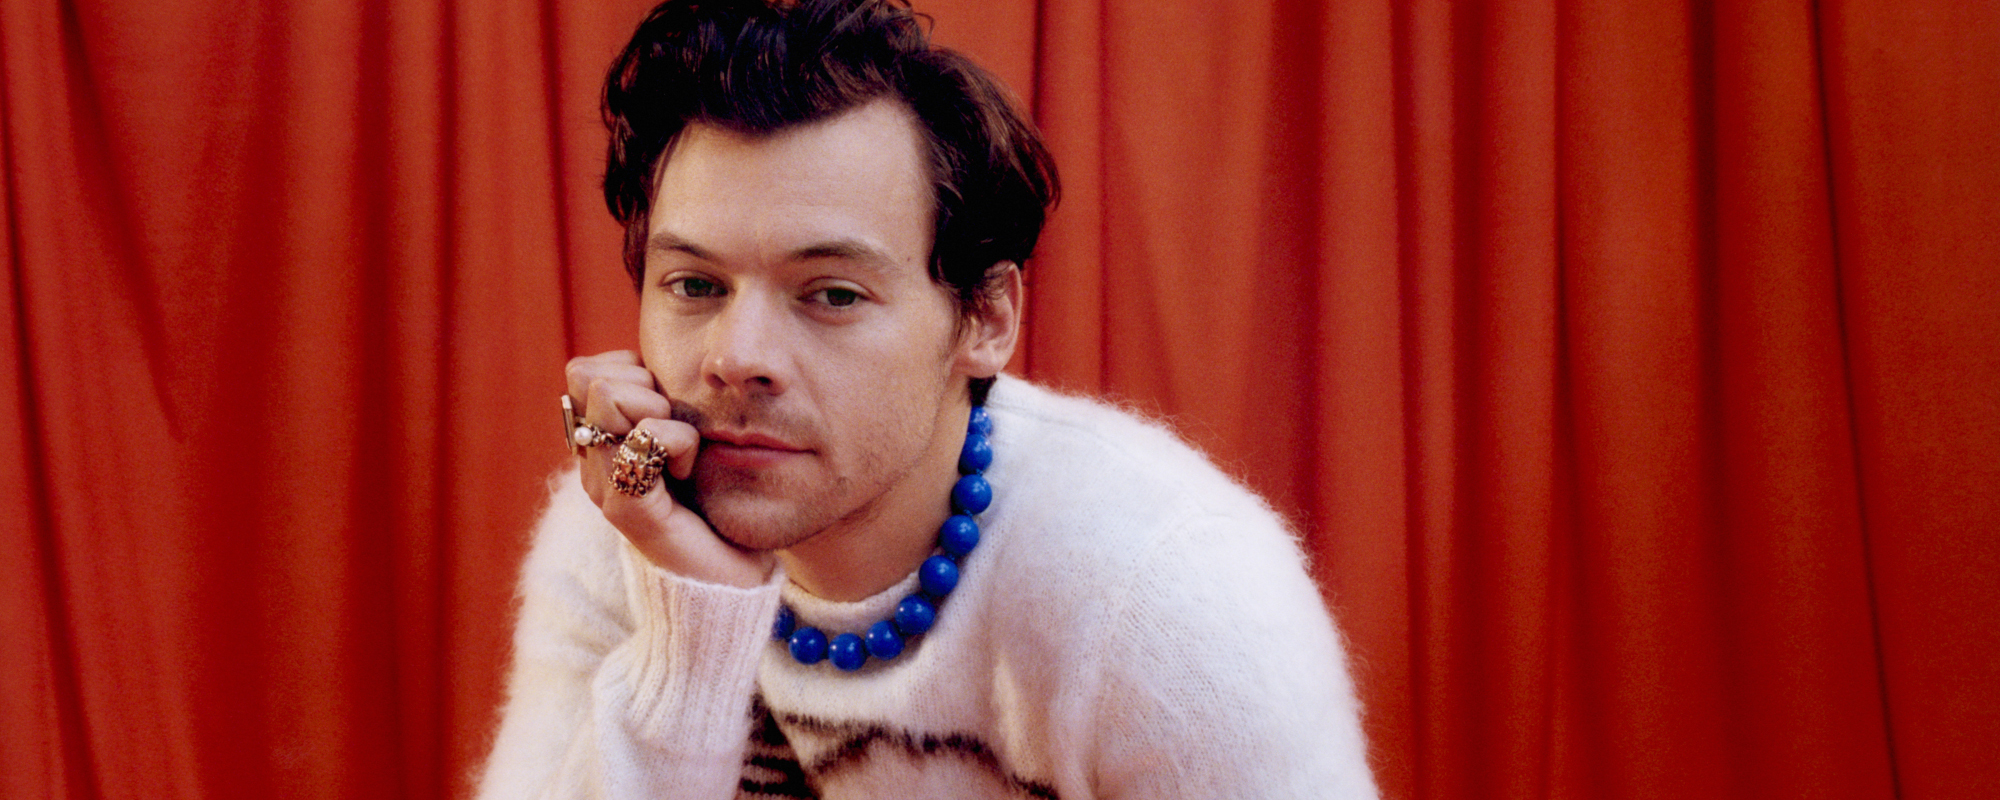 Review: Welcome to ‘Harry’s House’—Harry Styles’s Third Album is His Most Vibrant & Complex to Date